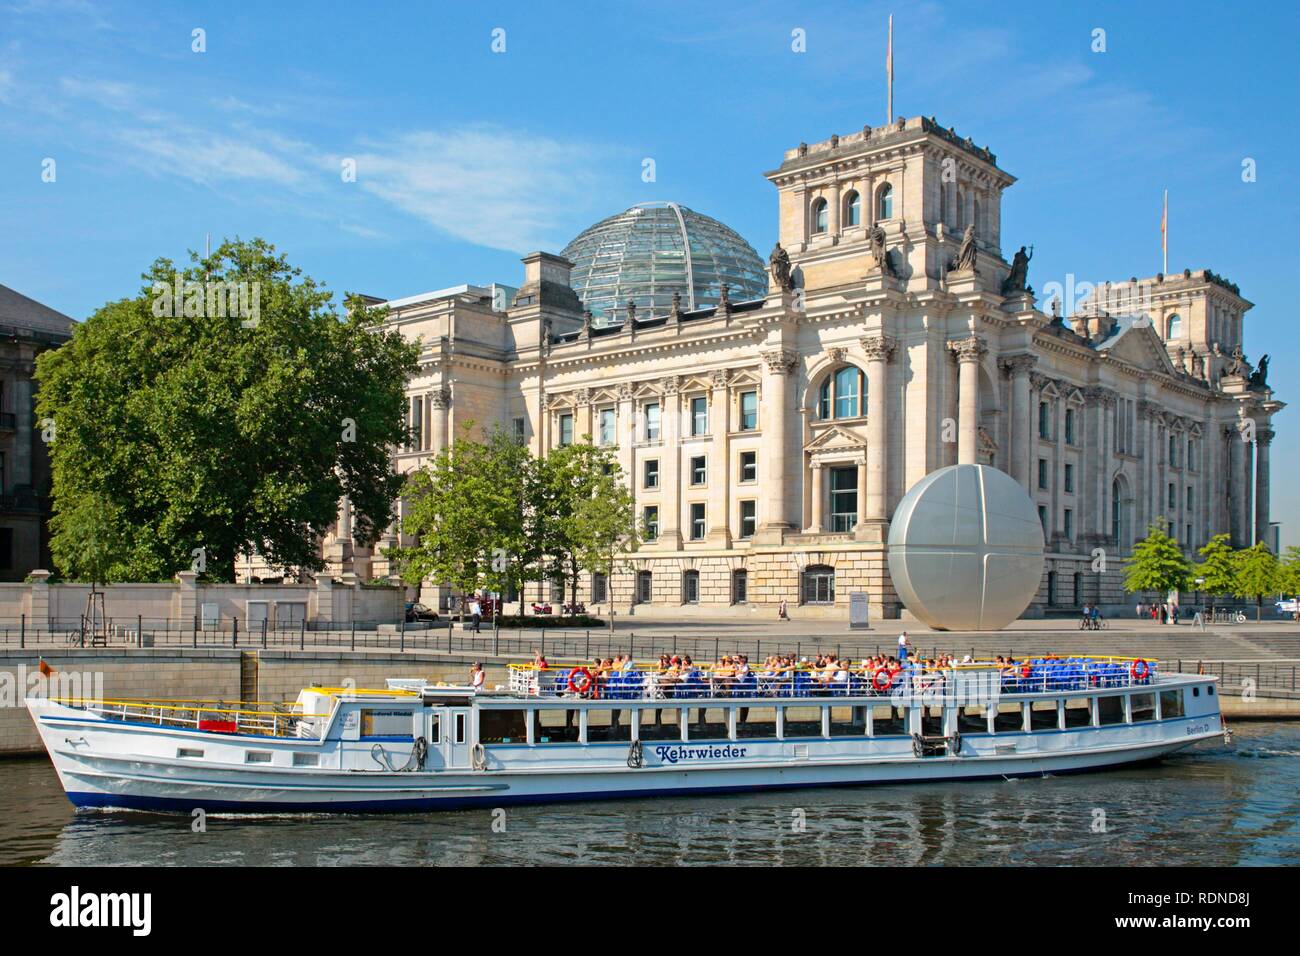 Excursion boat on the Spree River in front of the Reichstag Building, Government Area, Berlin Stock Photo